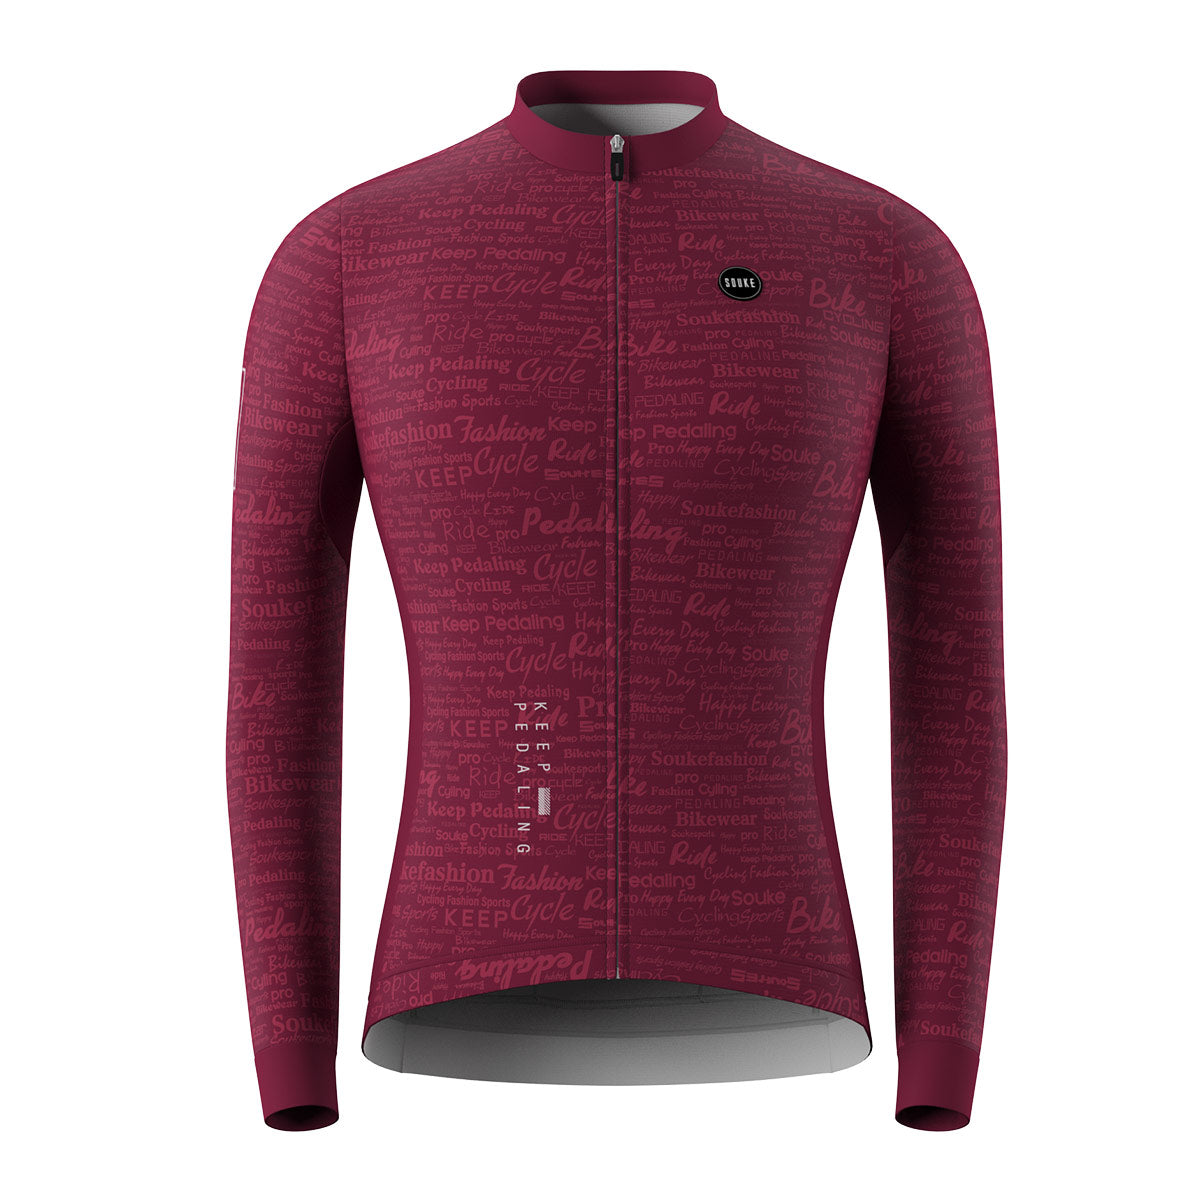 cycling long sleeve jersey, Graphene jersey,jersey for winter,Bordeaux long jersey,jersey for winter and autumn, cold weather jersey (6805603352689)